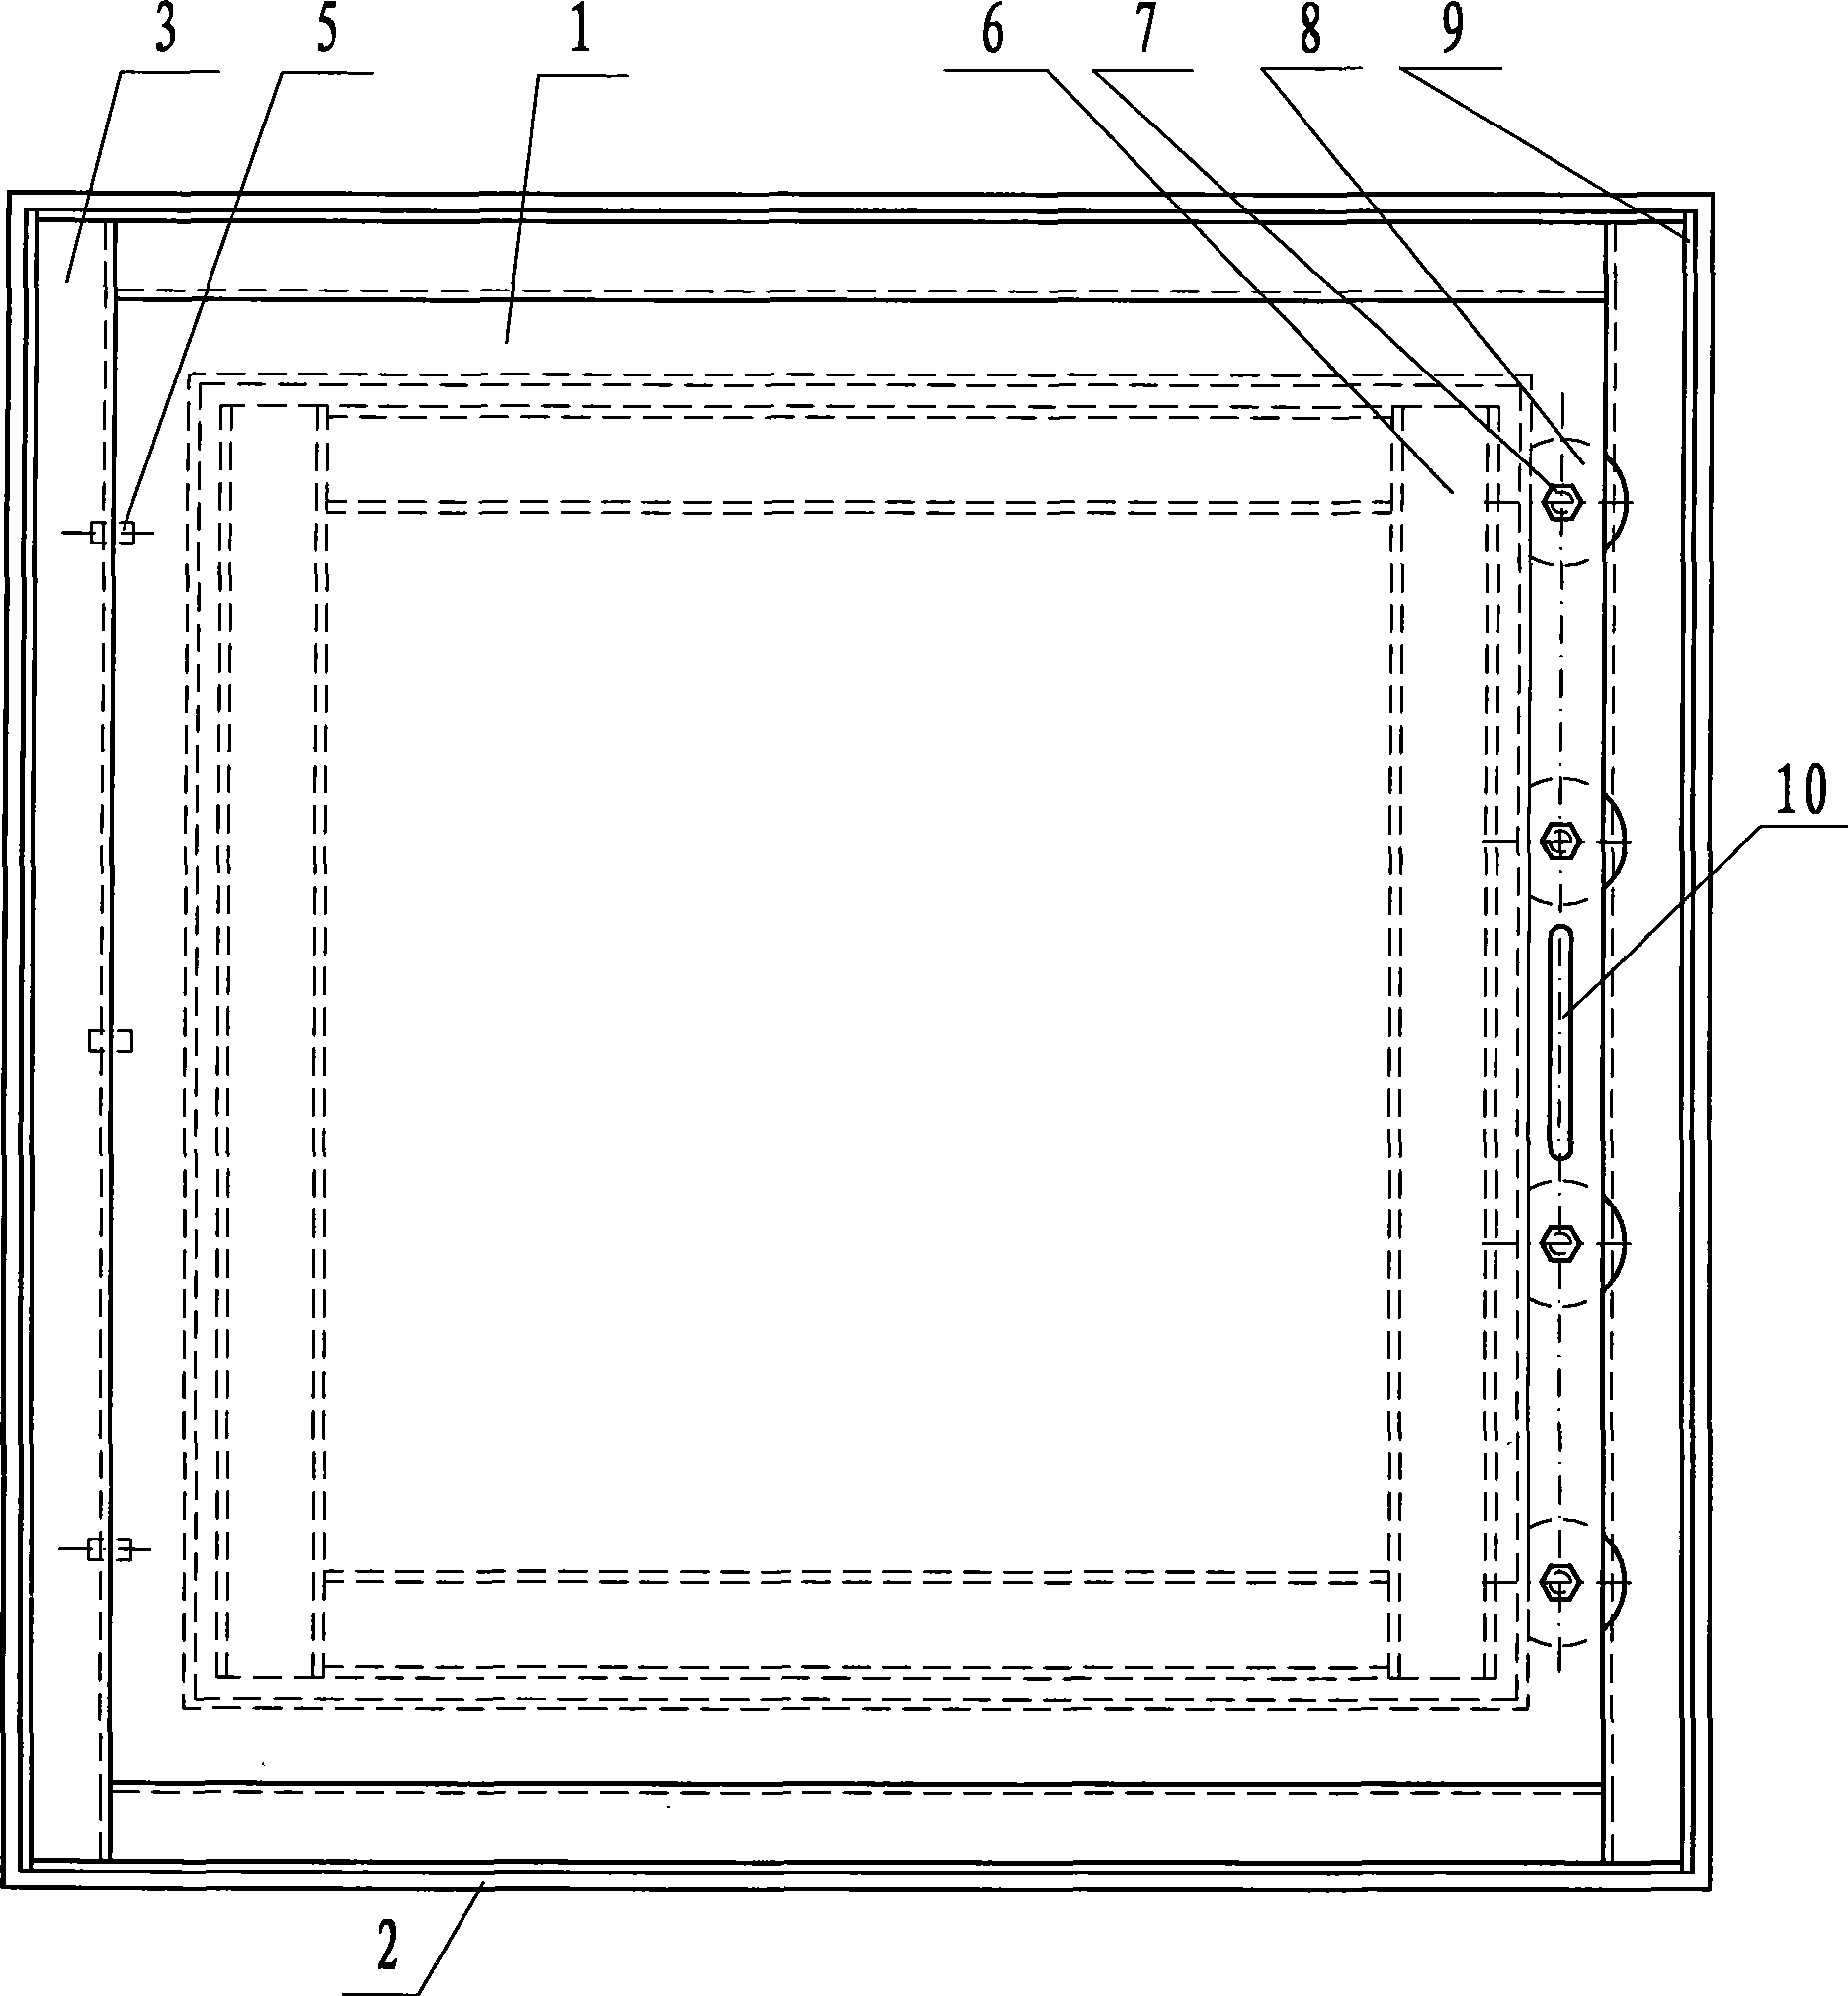 Cipher well lid